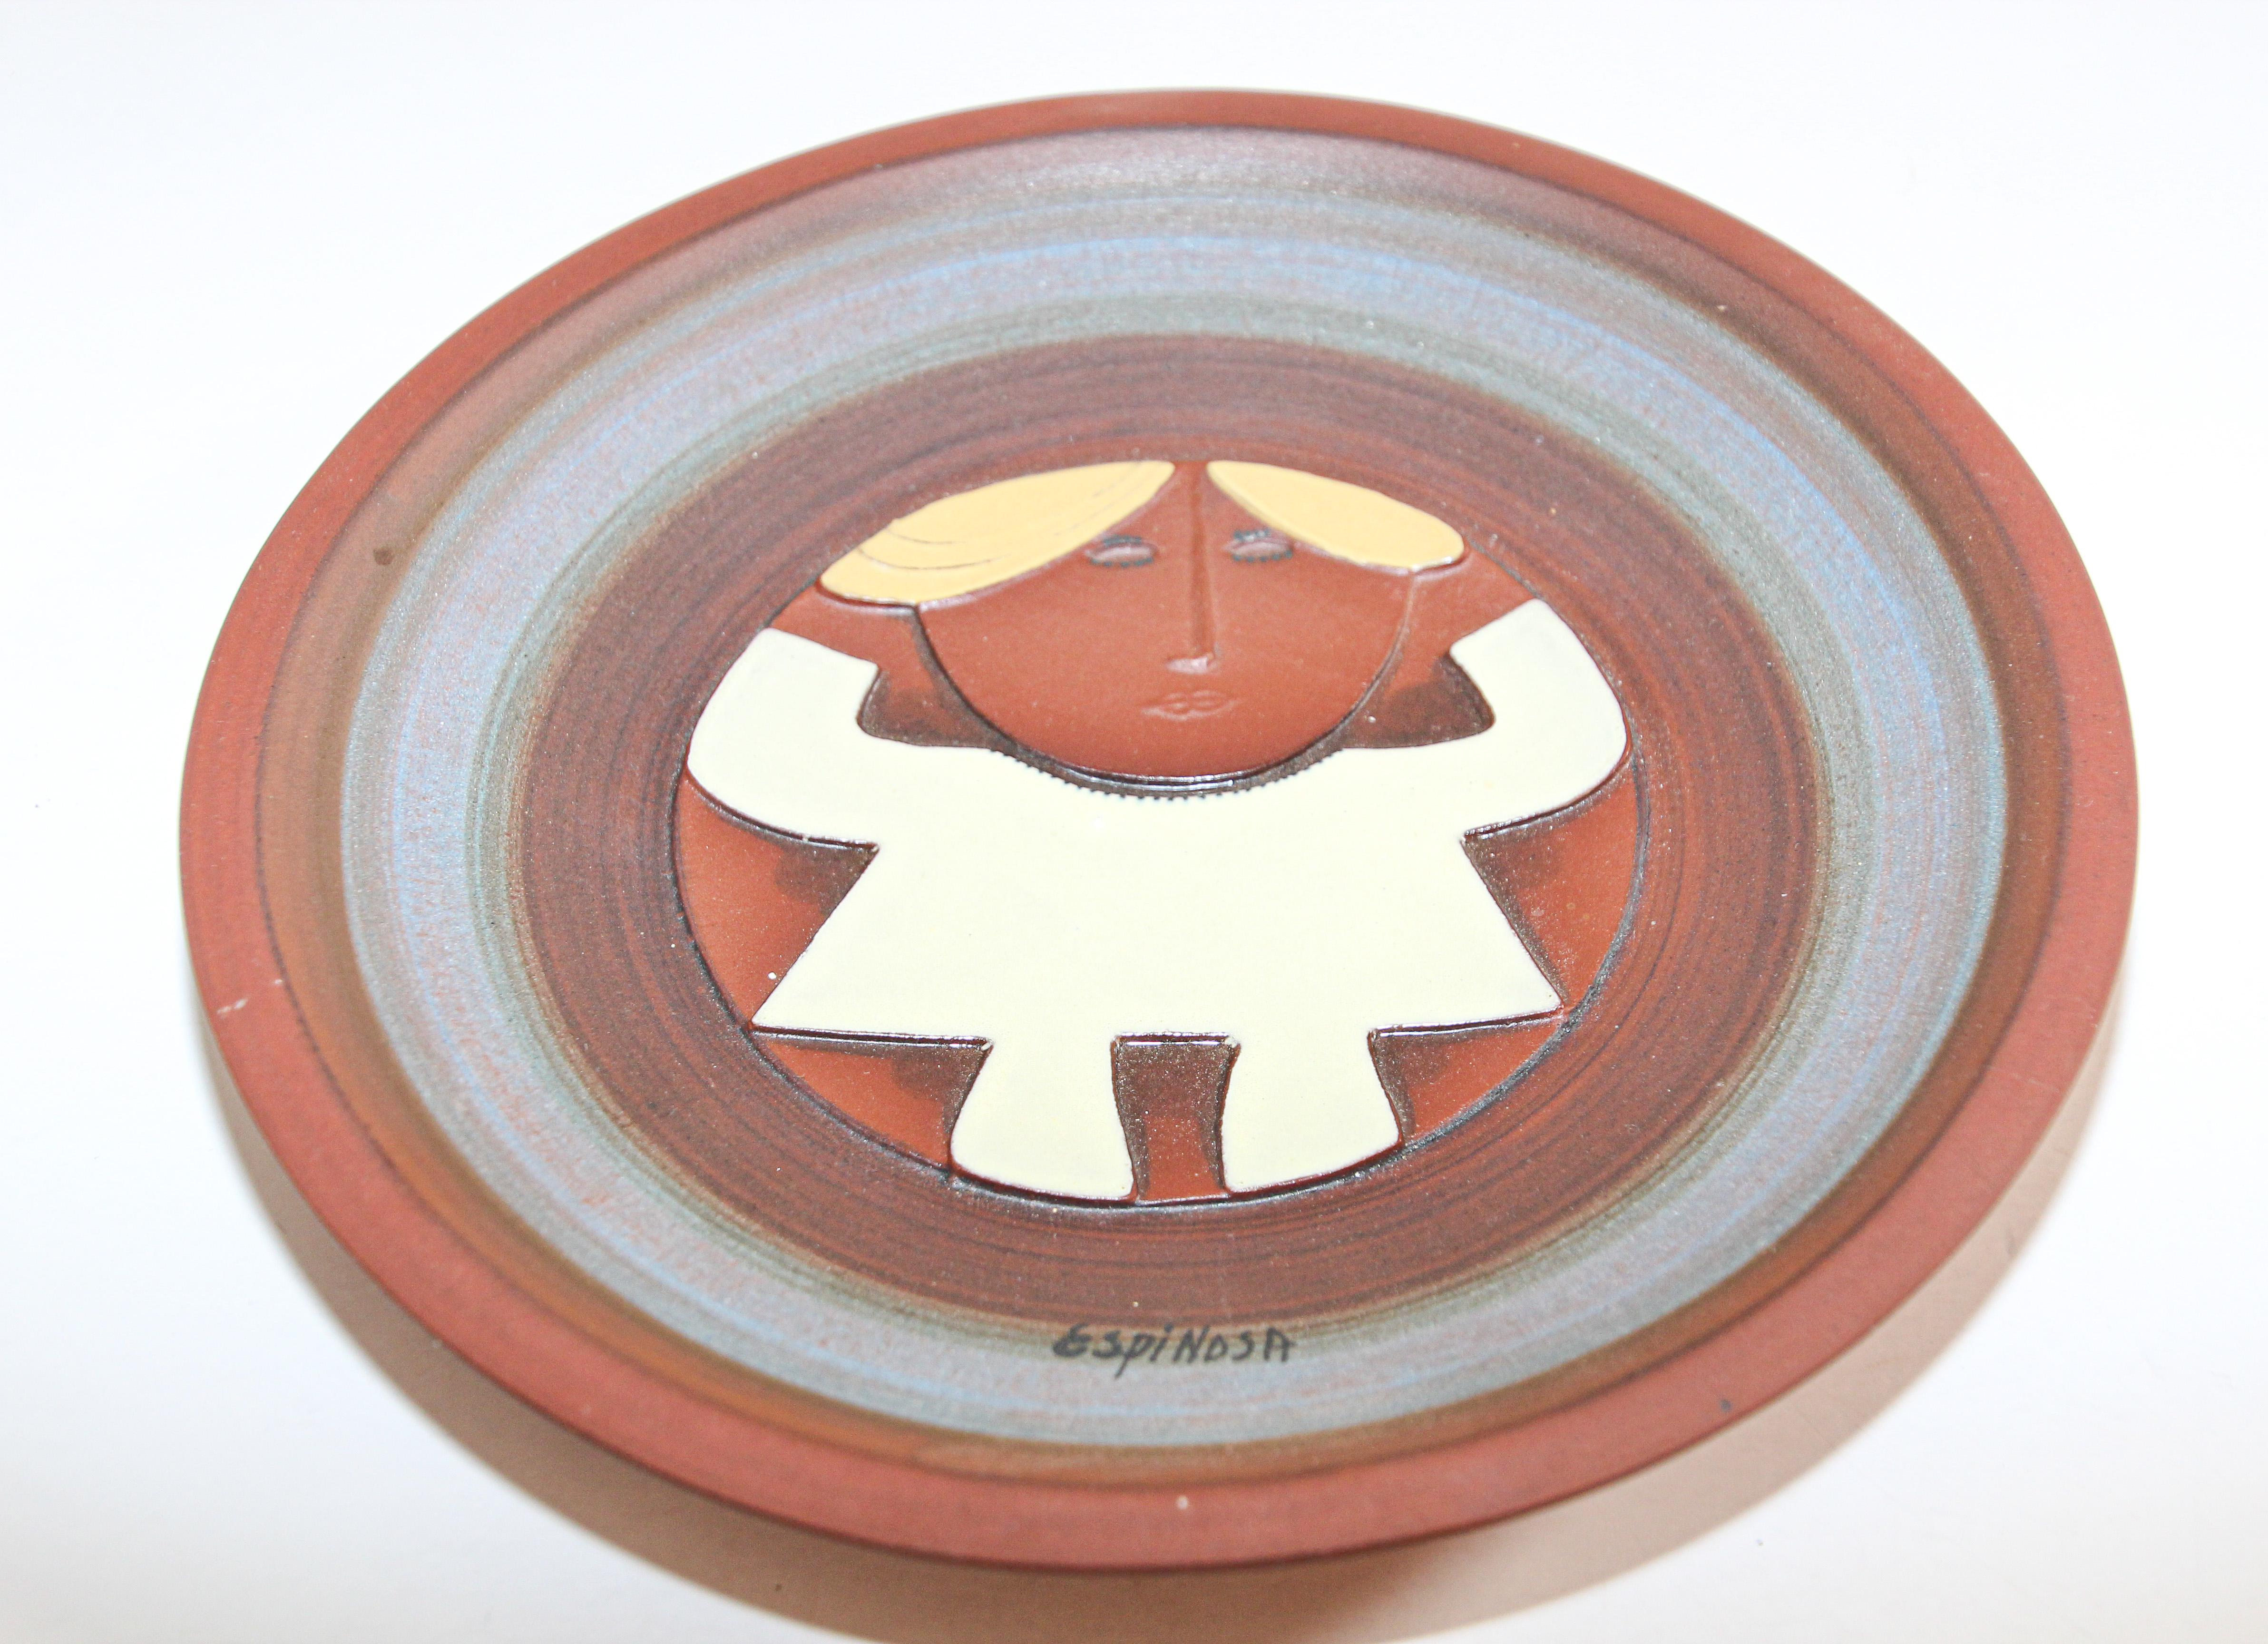 Rare vintage Susana Espinosa signed vintage abstract Glazed Sgraffito terracotta ceramic art plate charger stoneware studio 1970s Puerto Rico.
Early outstanding piece by Espinosa -reputably Puerto Rico's most important modernist art potter.